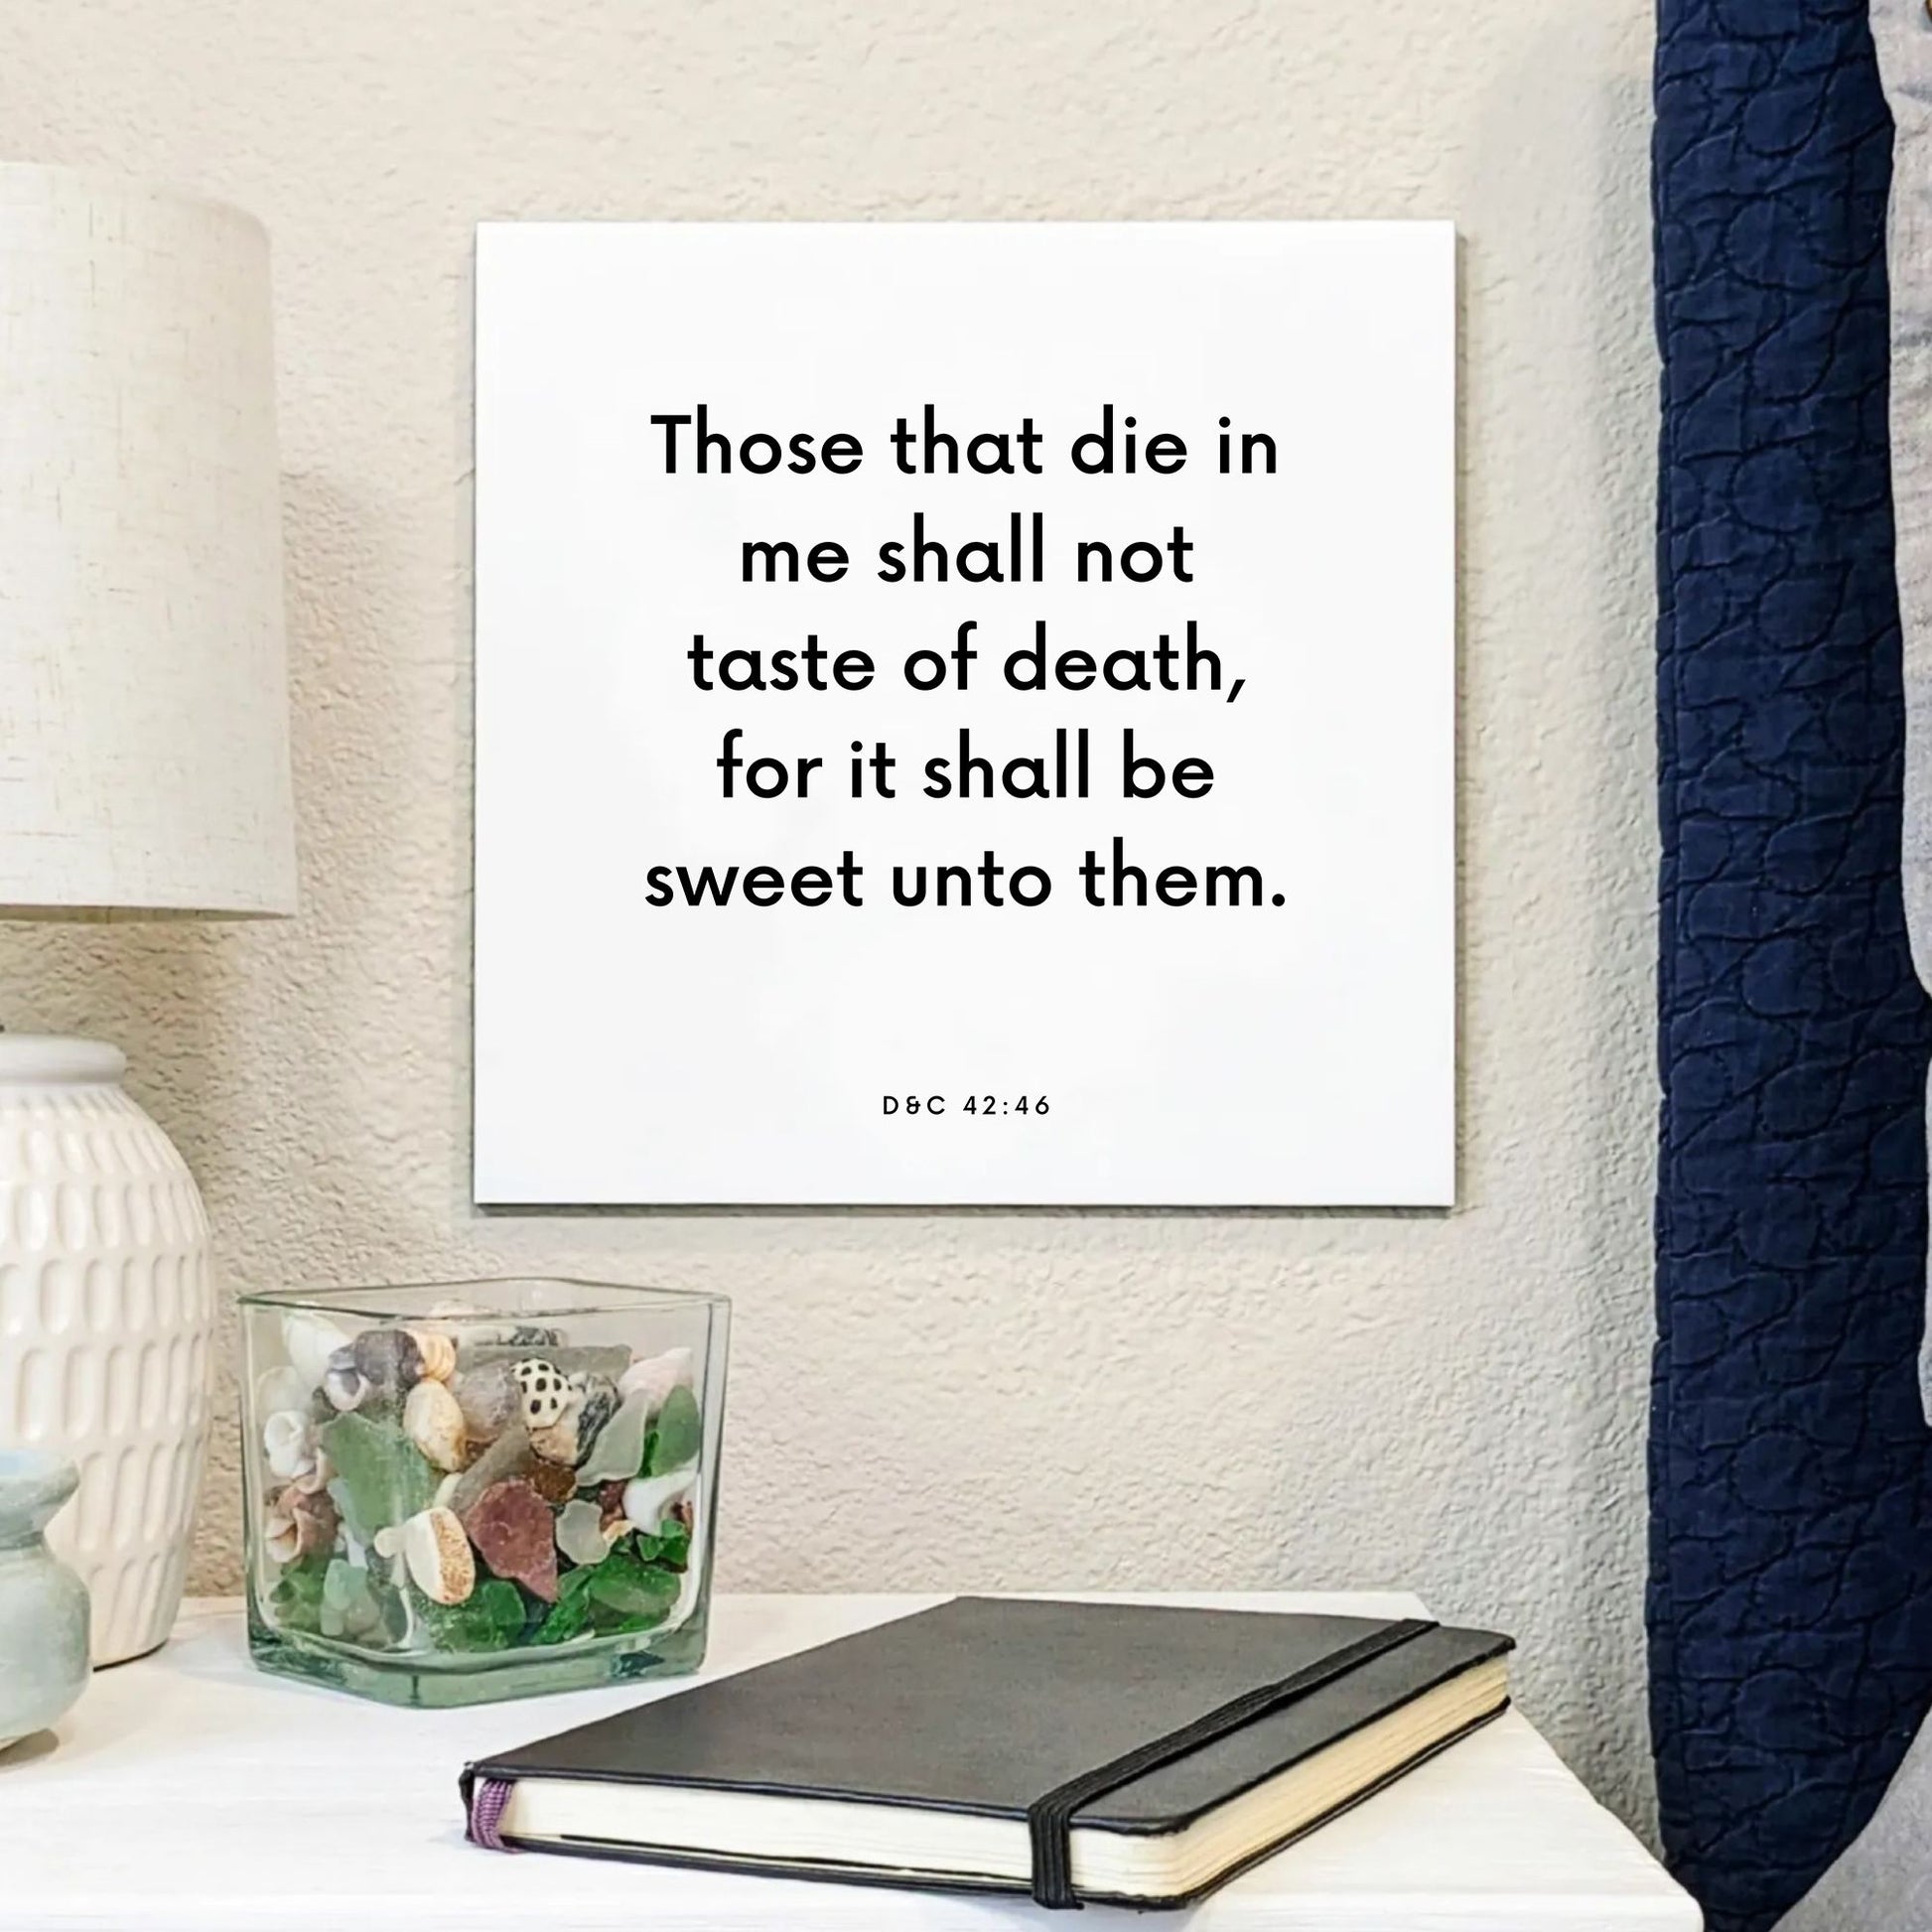 Bedside mouting of the scripture tile for D&C 42:46 - "Those that die in me shall not taste of death"